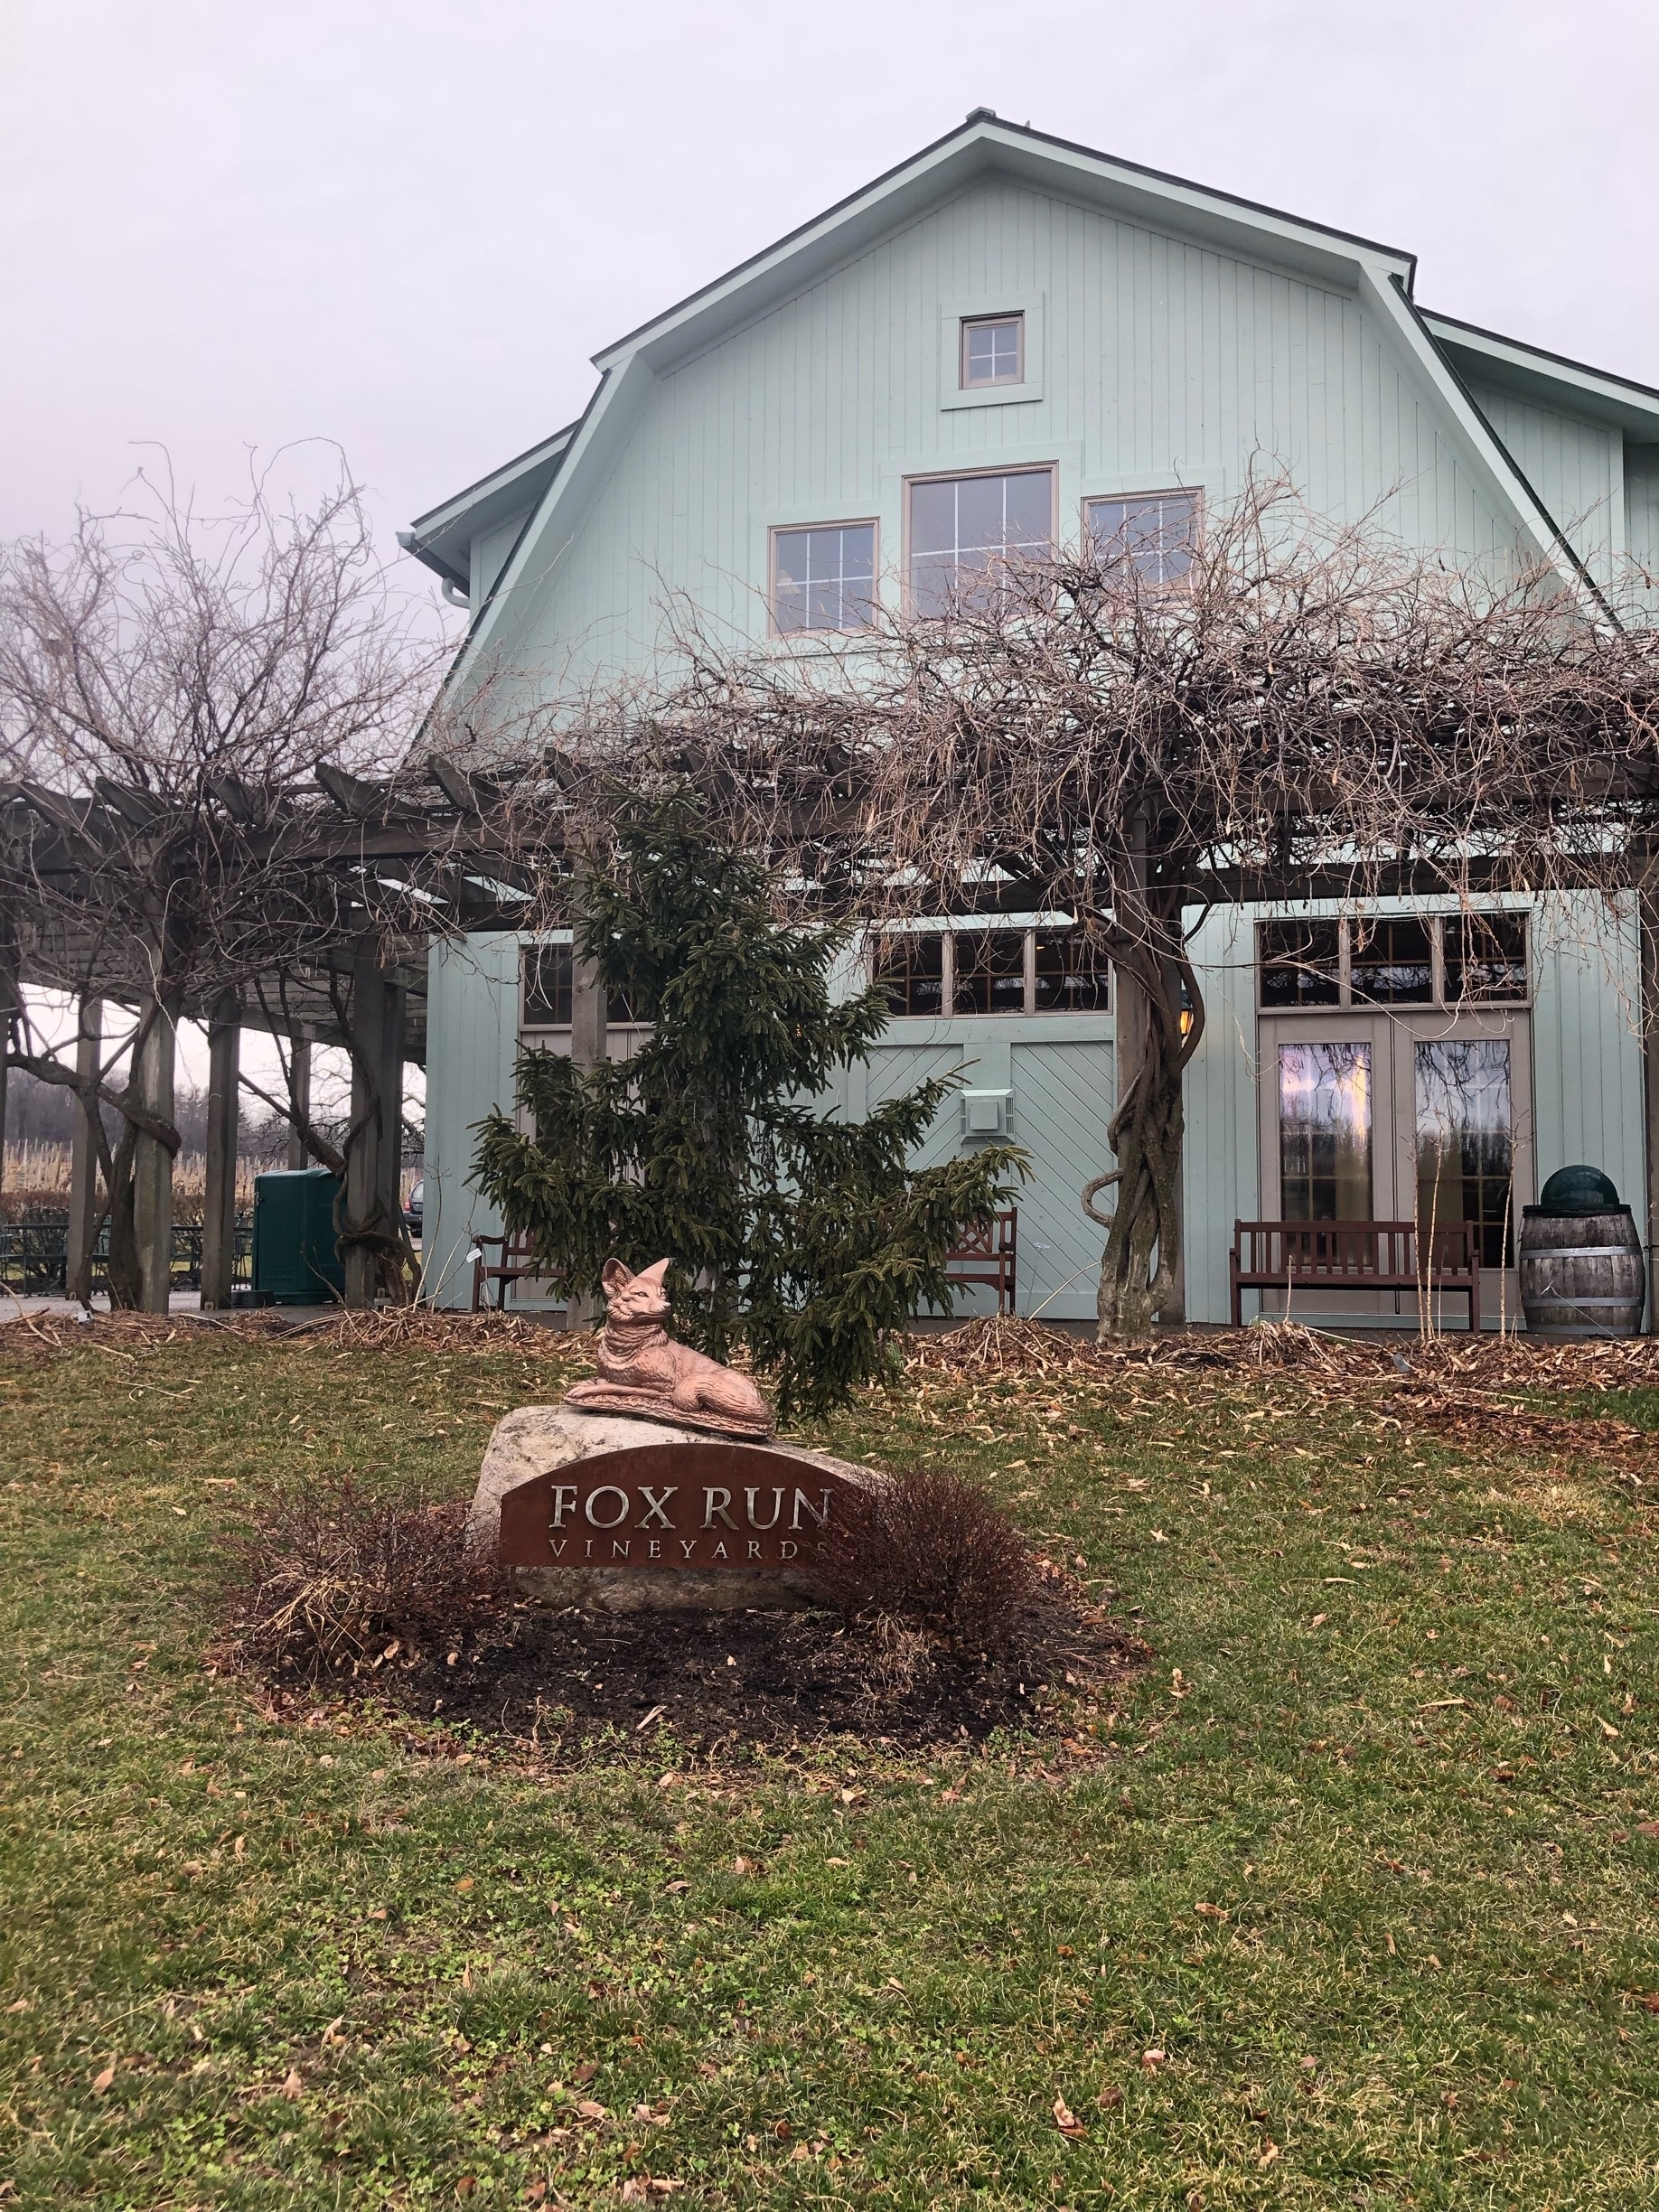 One of the highest rated wineries in the Finger Lakes has a club and a beautiful cafe with a view of Seneca Lake 